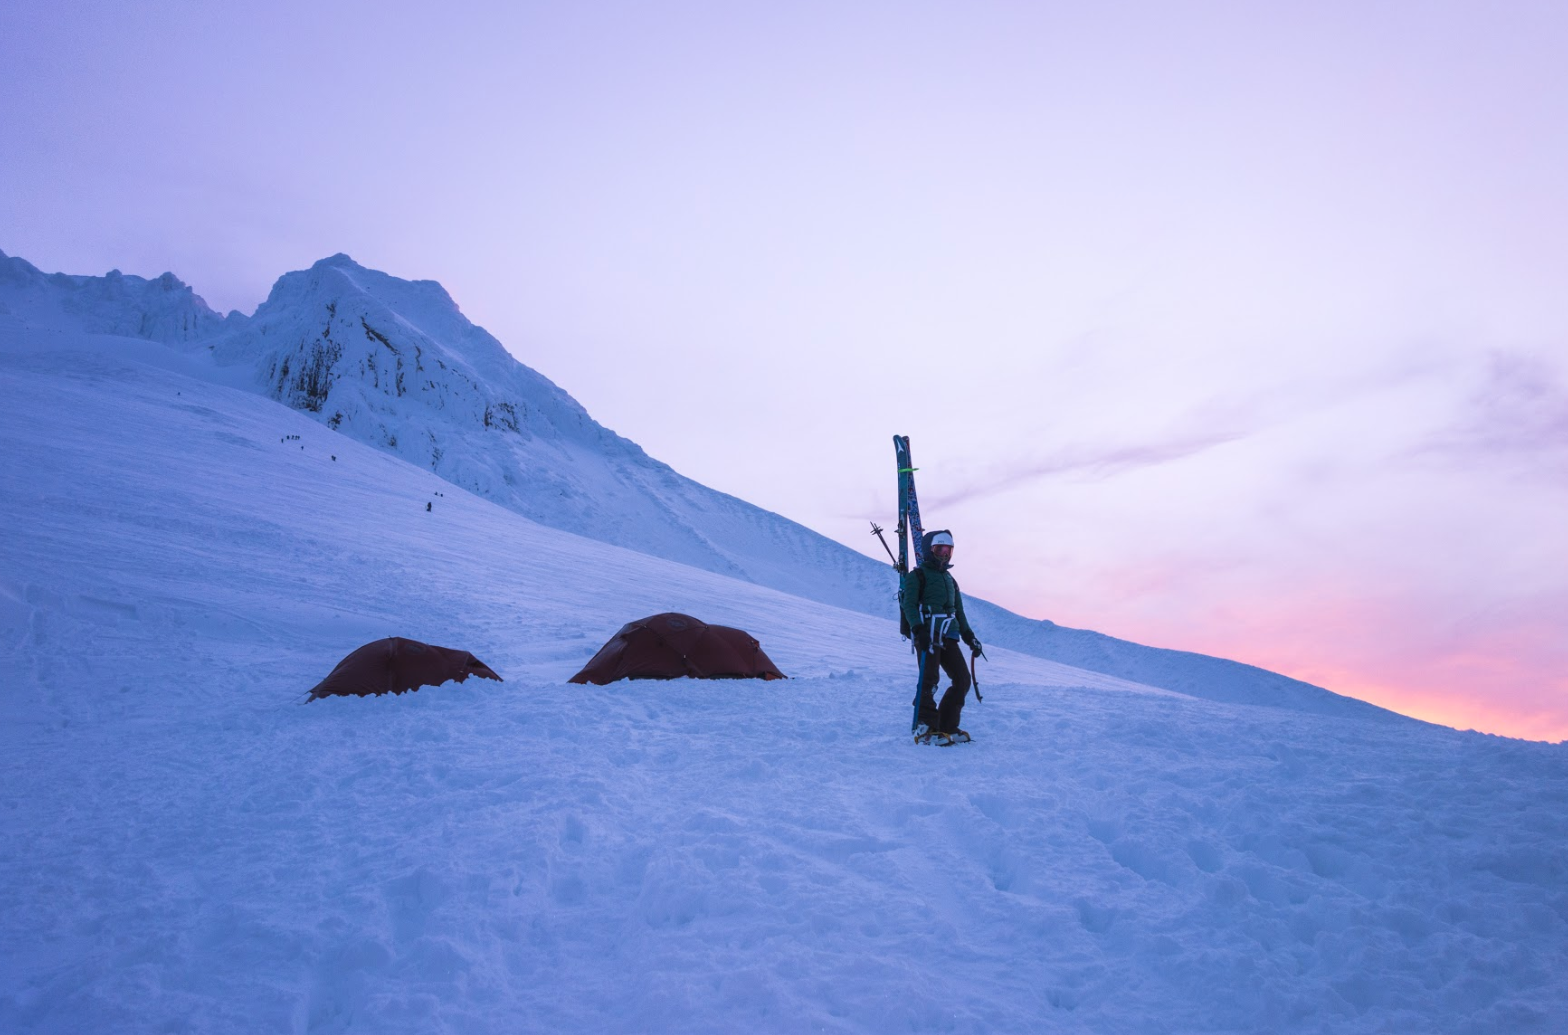 Scholarship for Women in the Backcountry